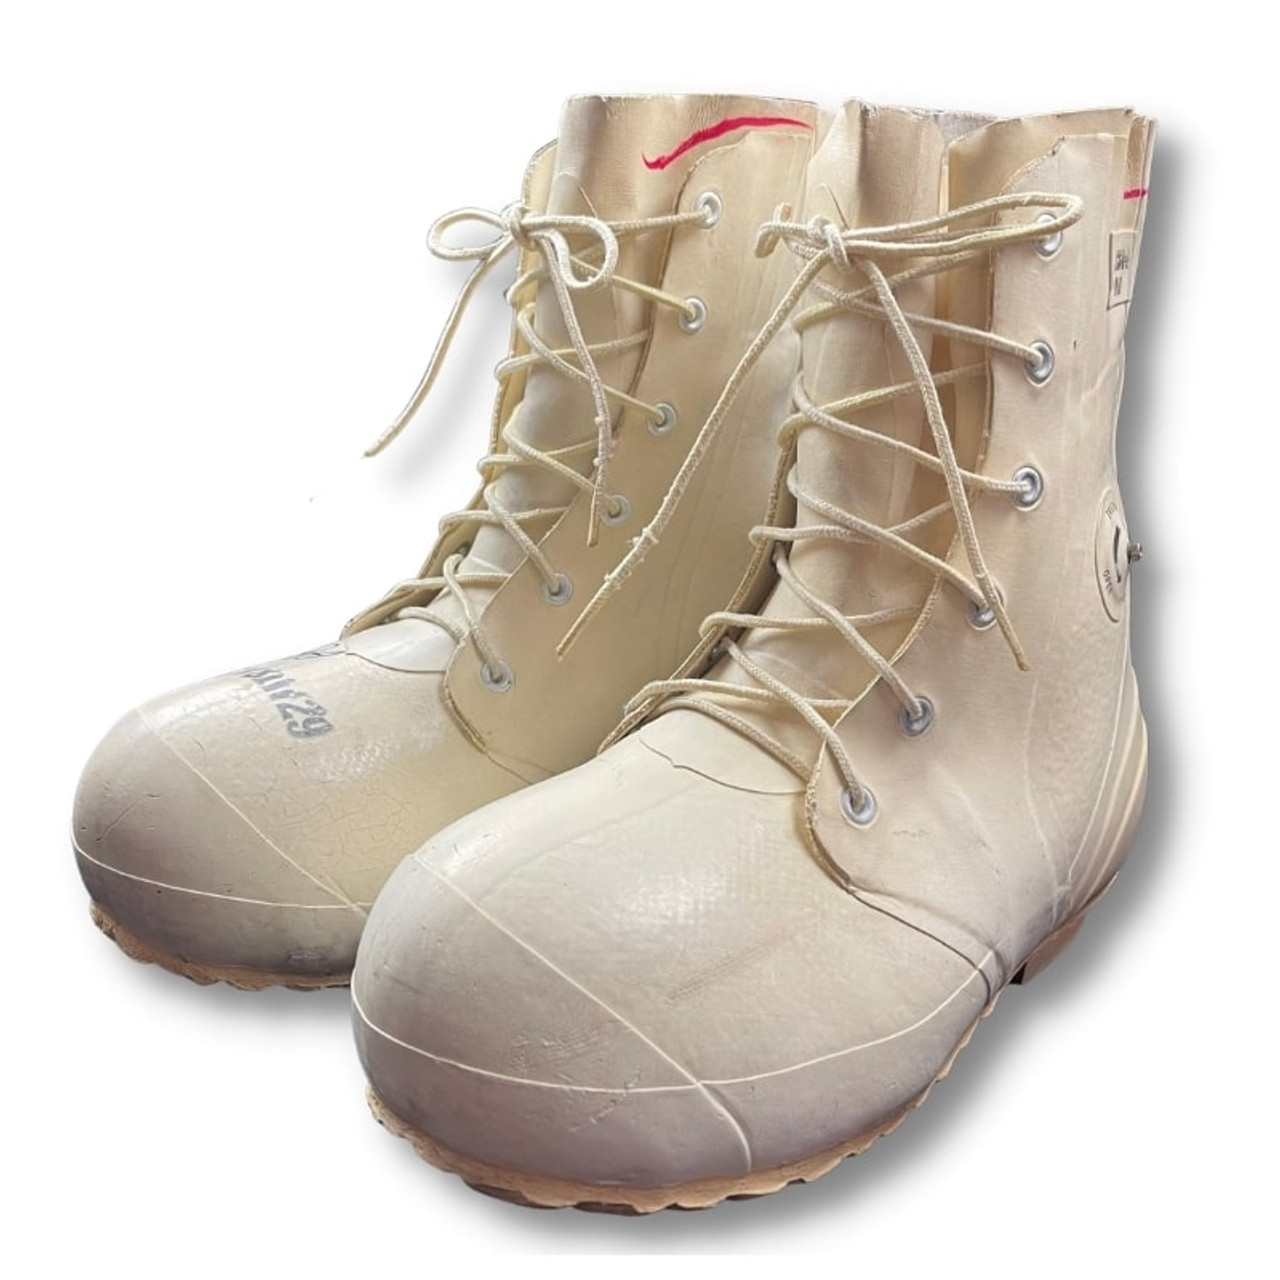 U.S Army - Military - Extreme Cold Weather Mickey Mouse Bunny Boots